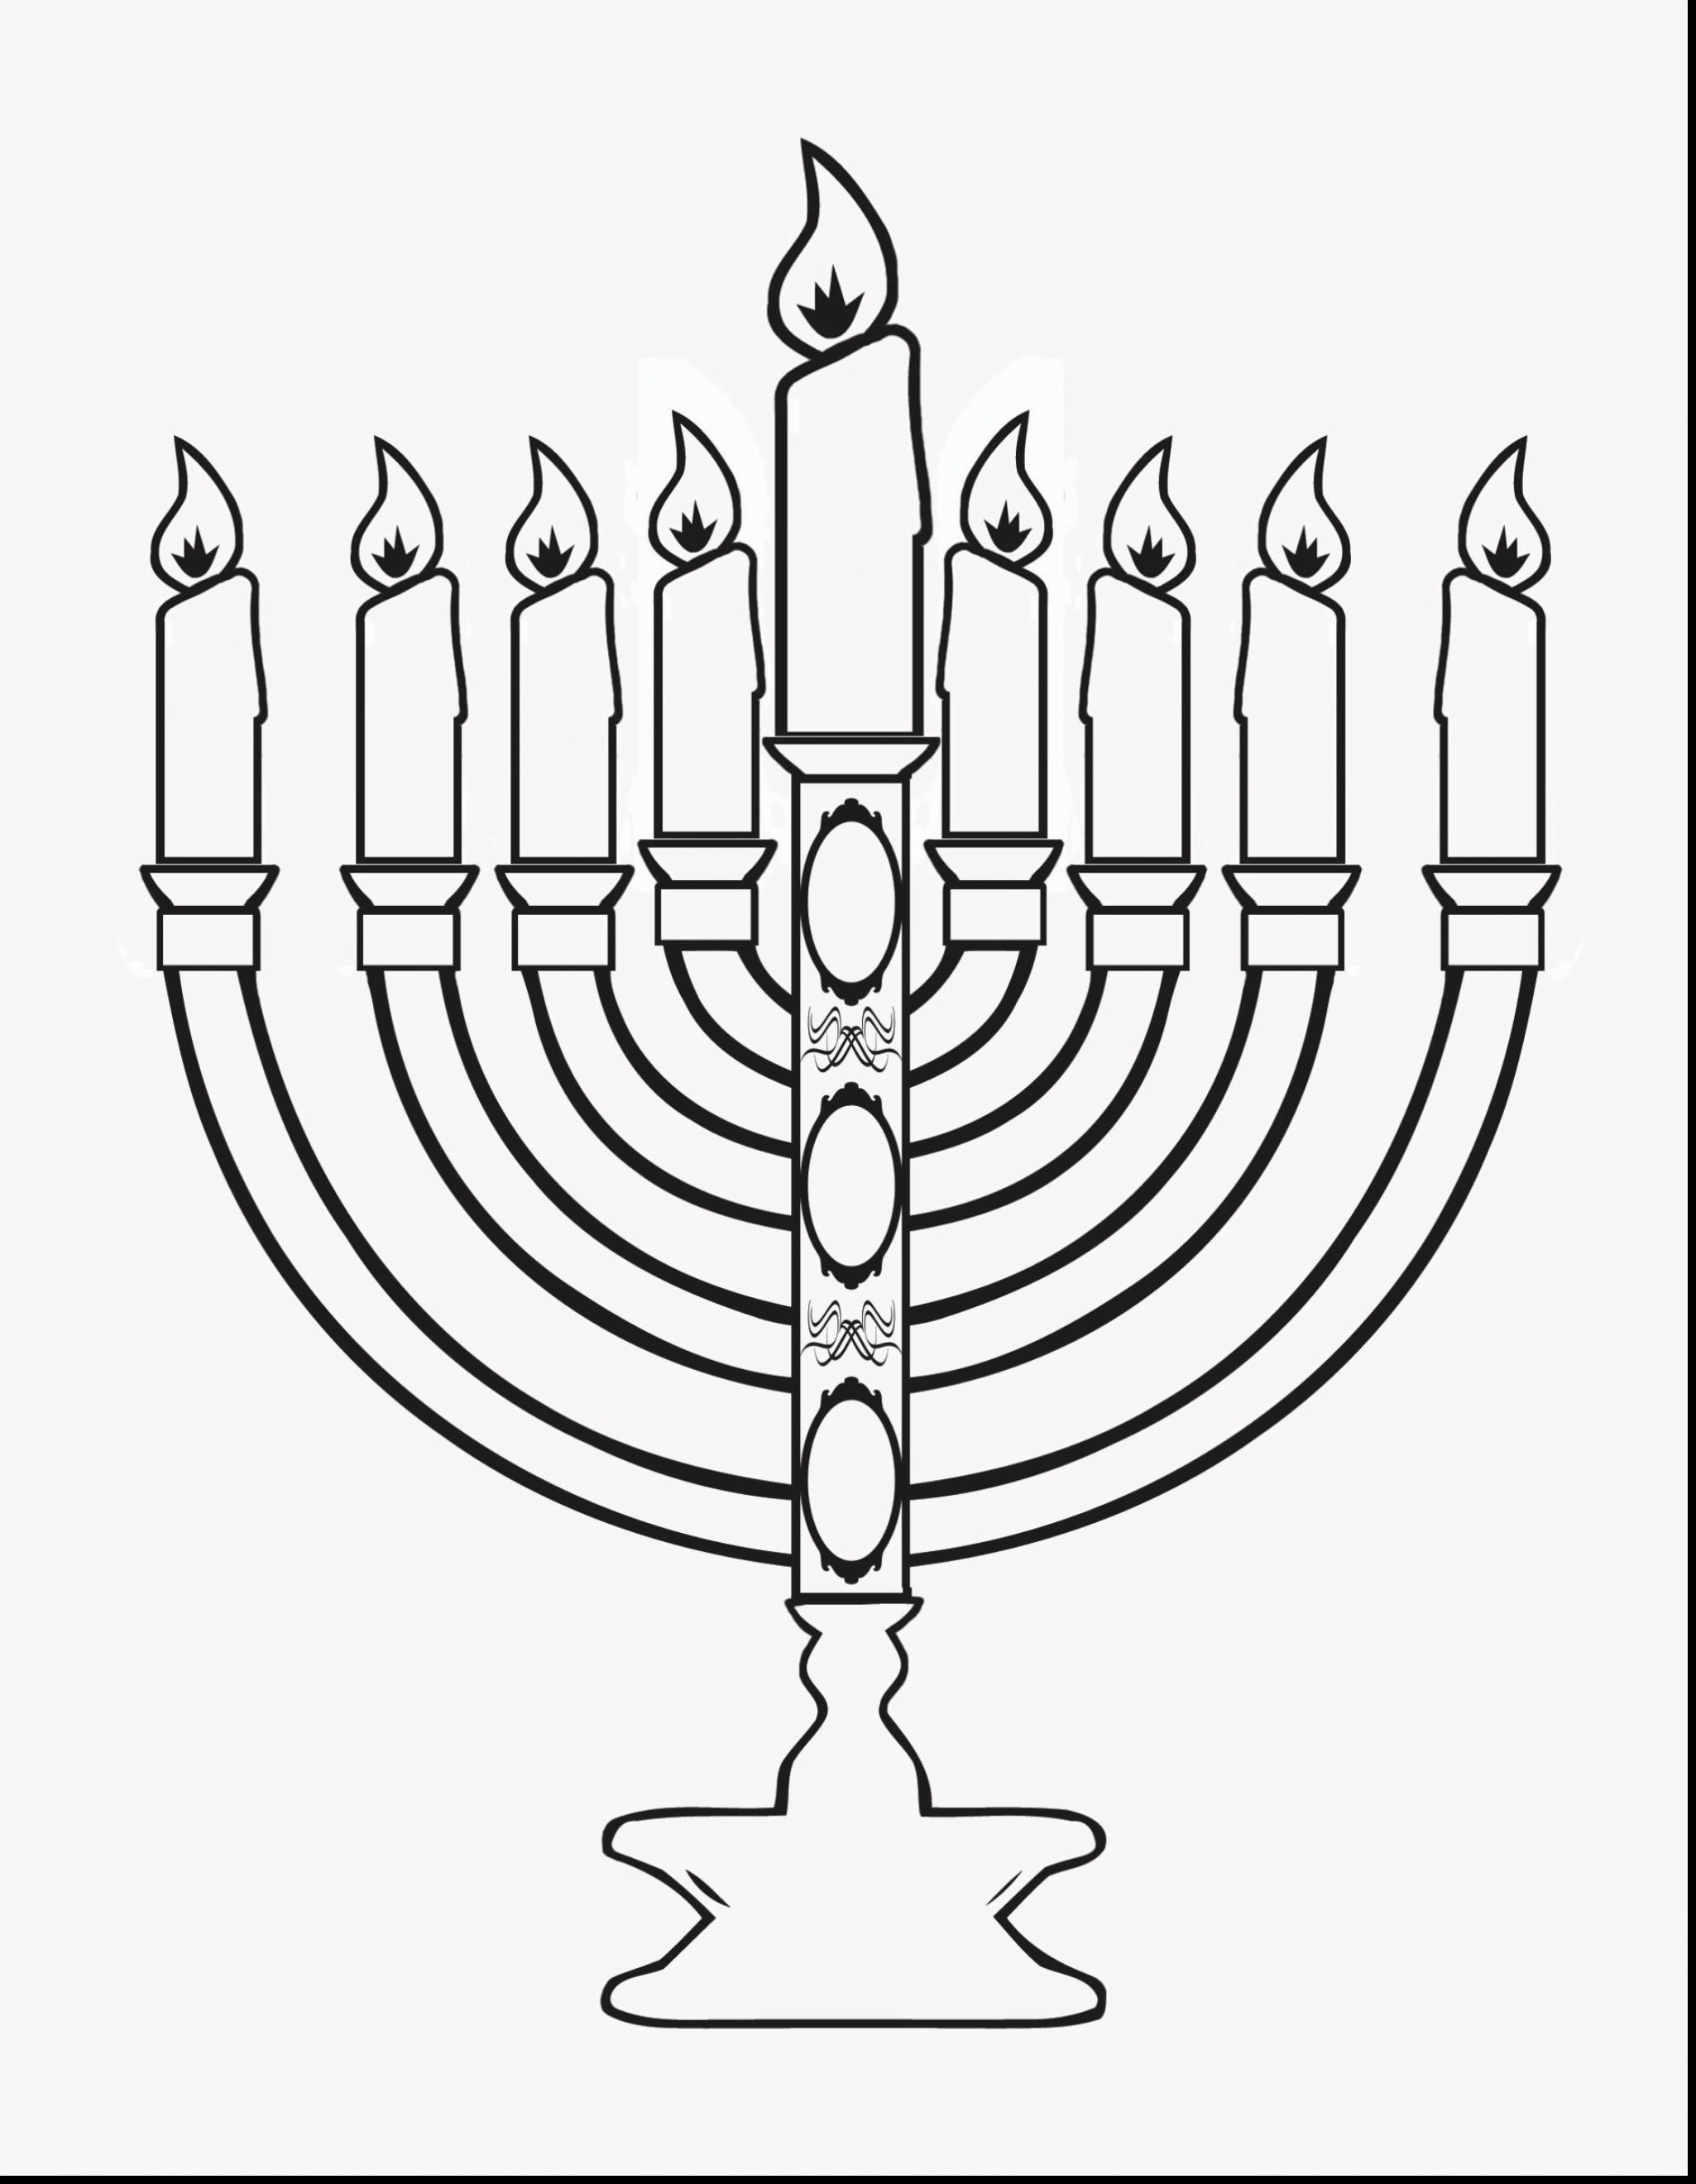 Chanukah Coloring Pages To Print at Free printable